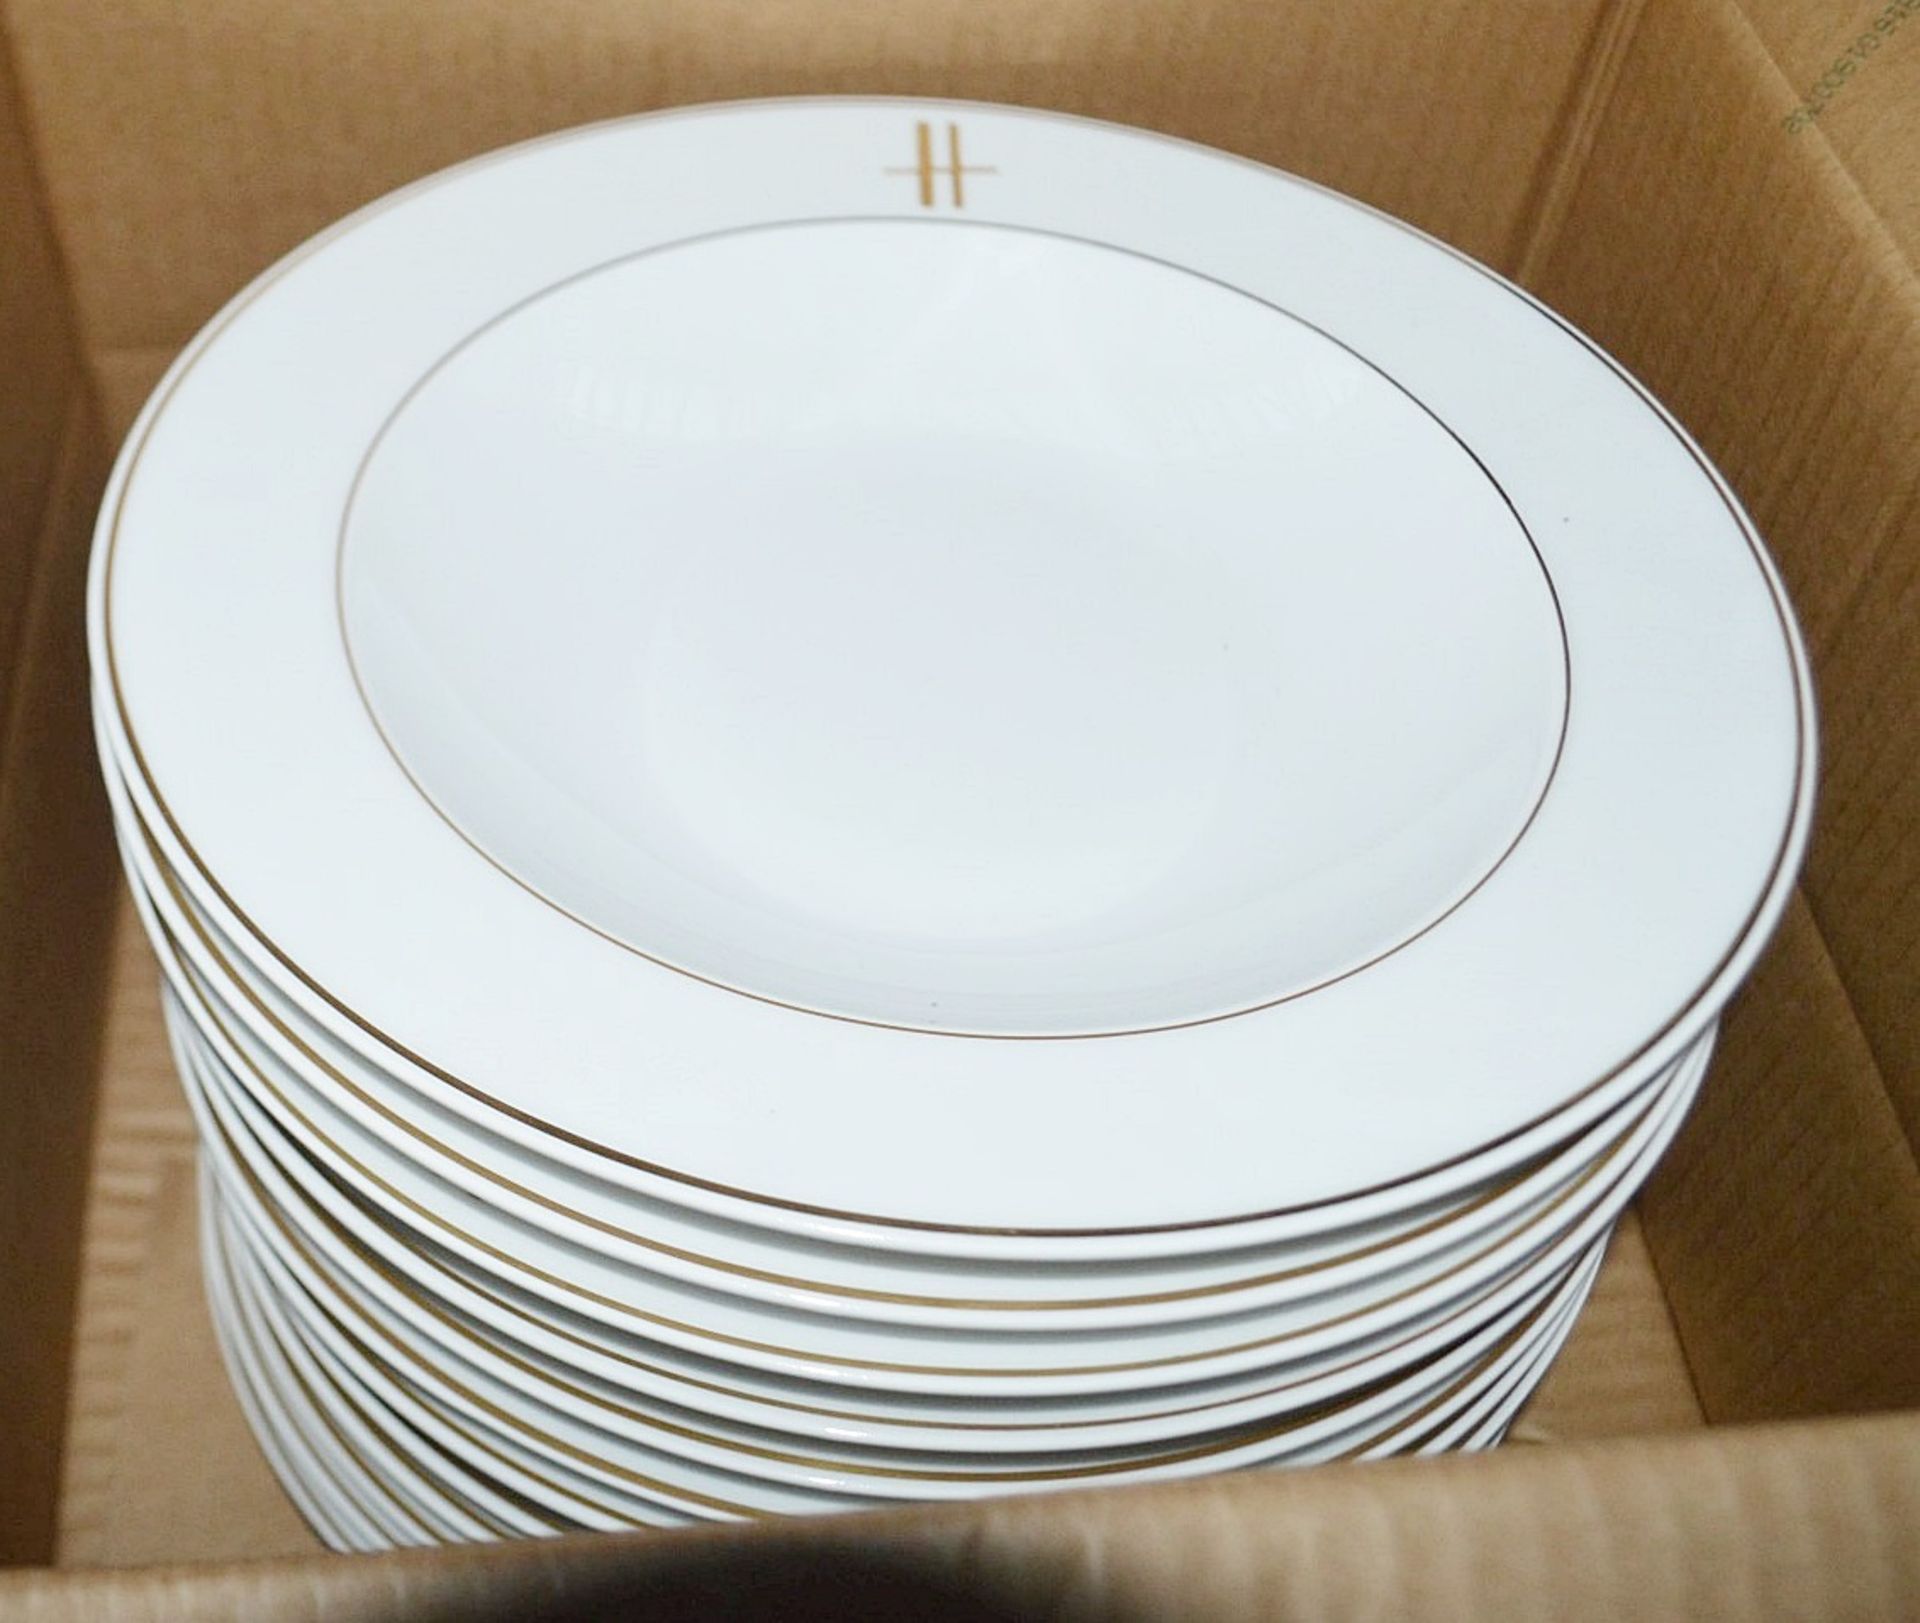 12 x PILLIVUYT 27cm Porcelain Pasta / Soup Plates In White Featuring 'Famous Branding' In Gold - Image 2 of 5